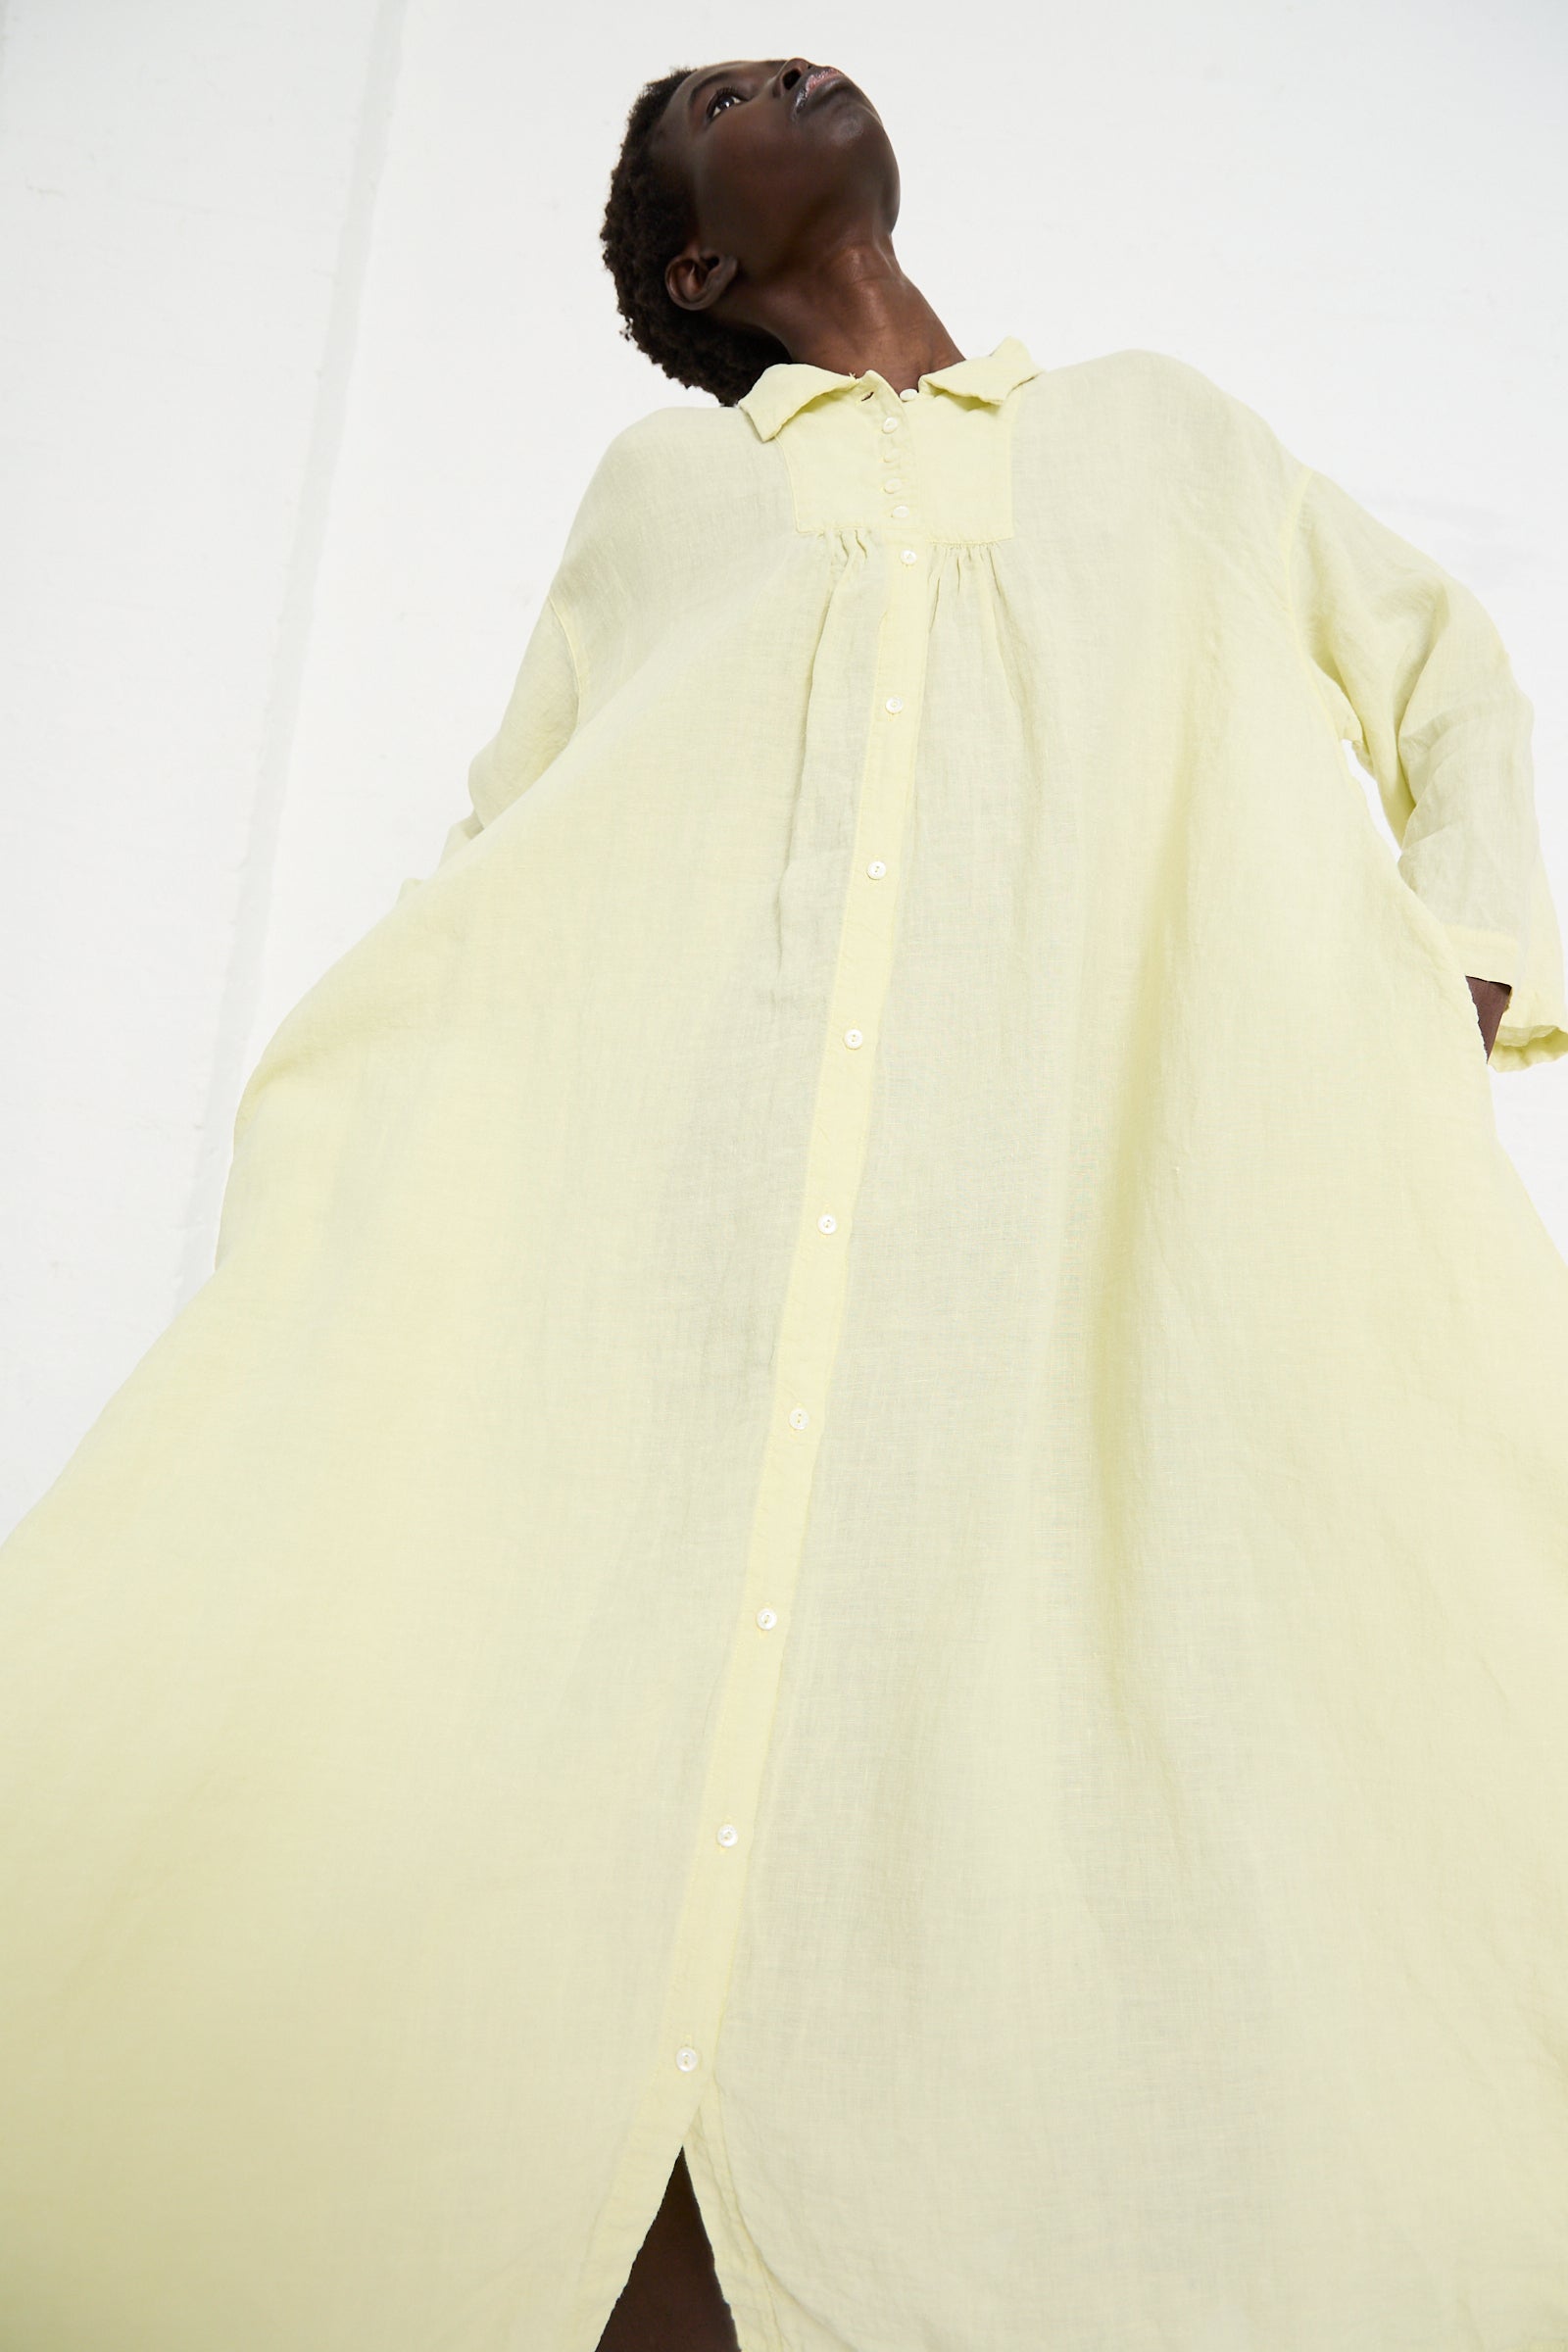 Person wearing a loose, Linen Omi-Zarashi Shirt Dress in Lemon by nest Robe with long sleeves and a button-down front, standing and looking upward. The photo is taken from a low angle against a plain background.